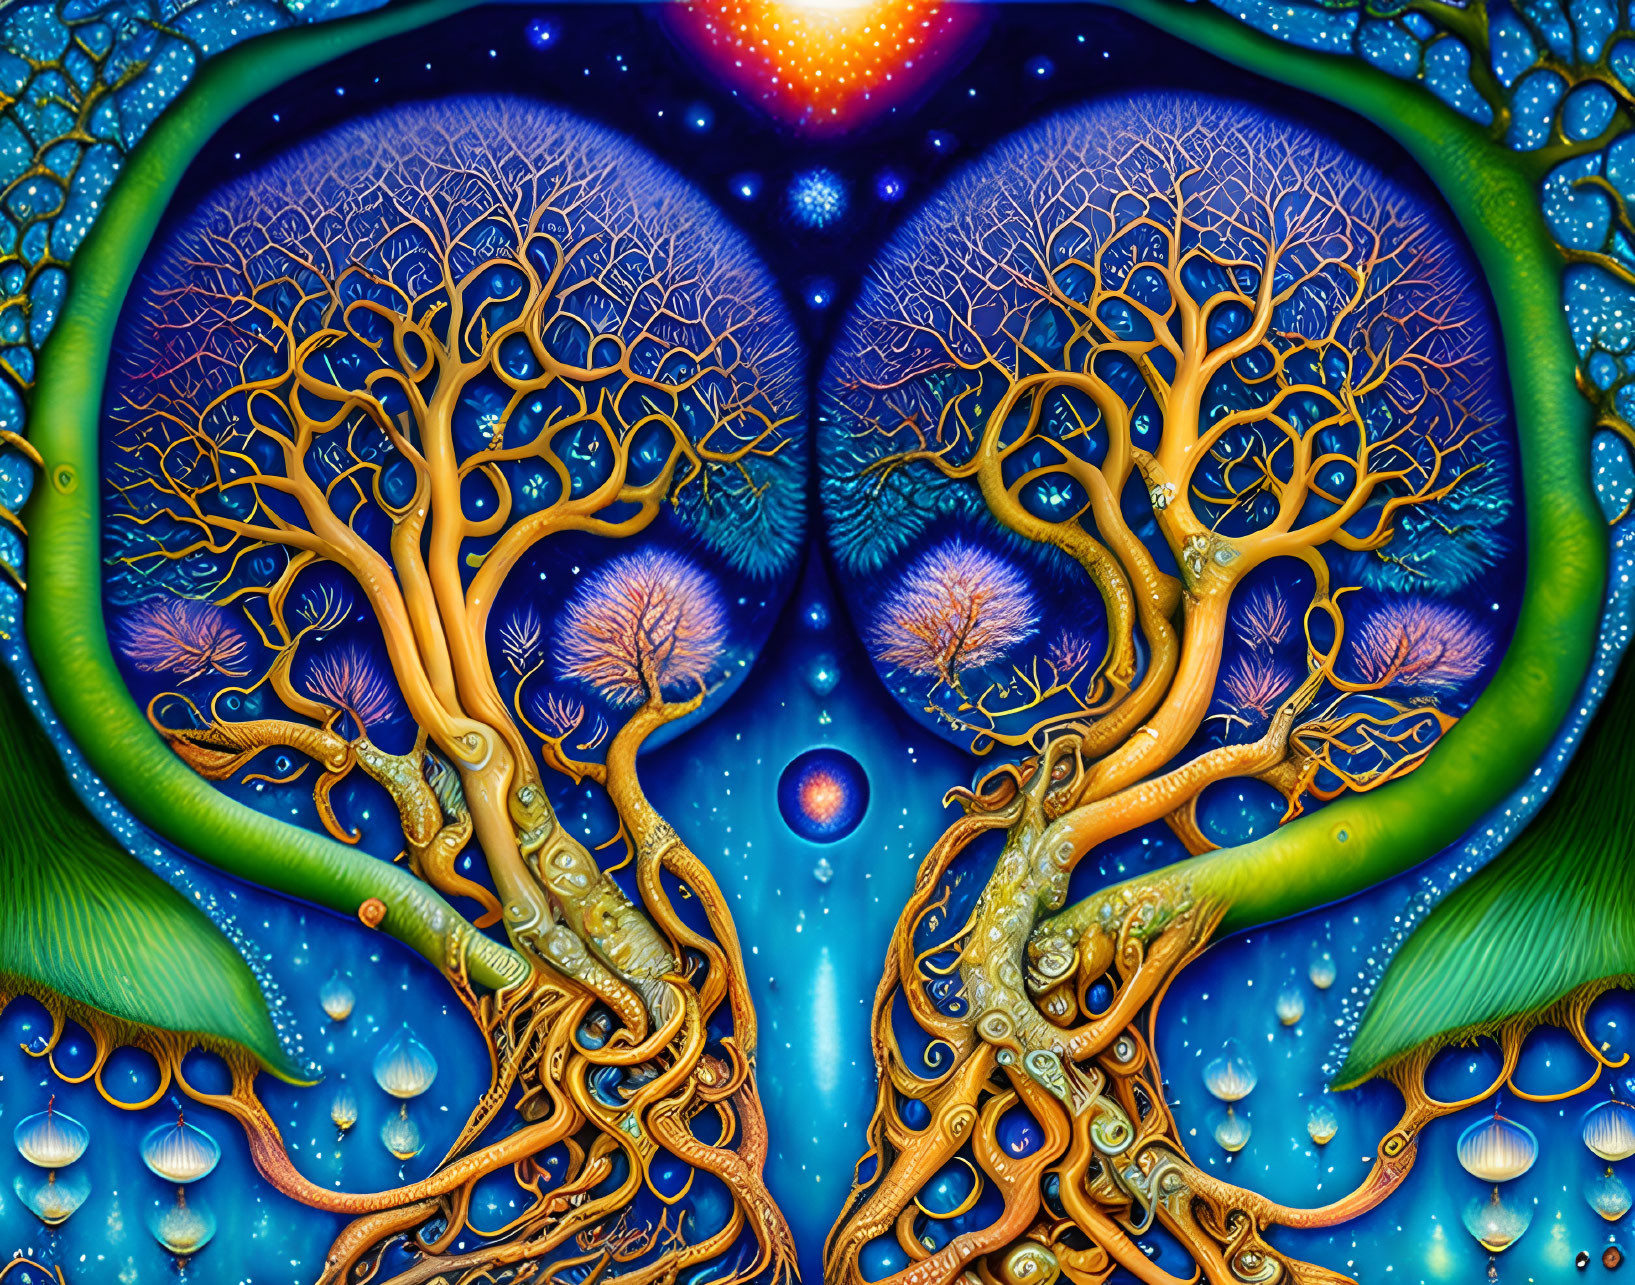 Psychedelic artwork: Intertwining trees with mirrored lung branches